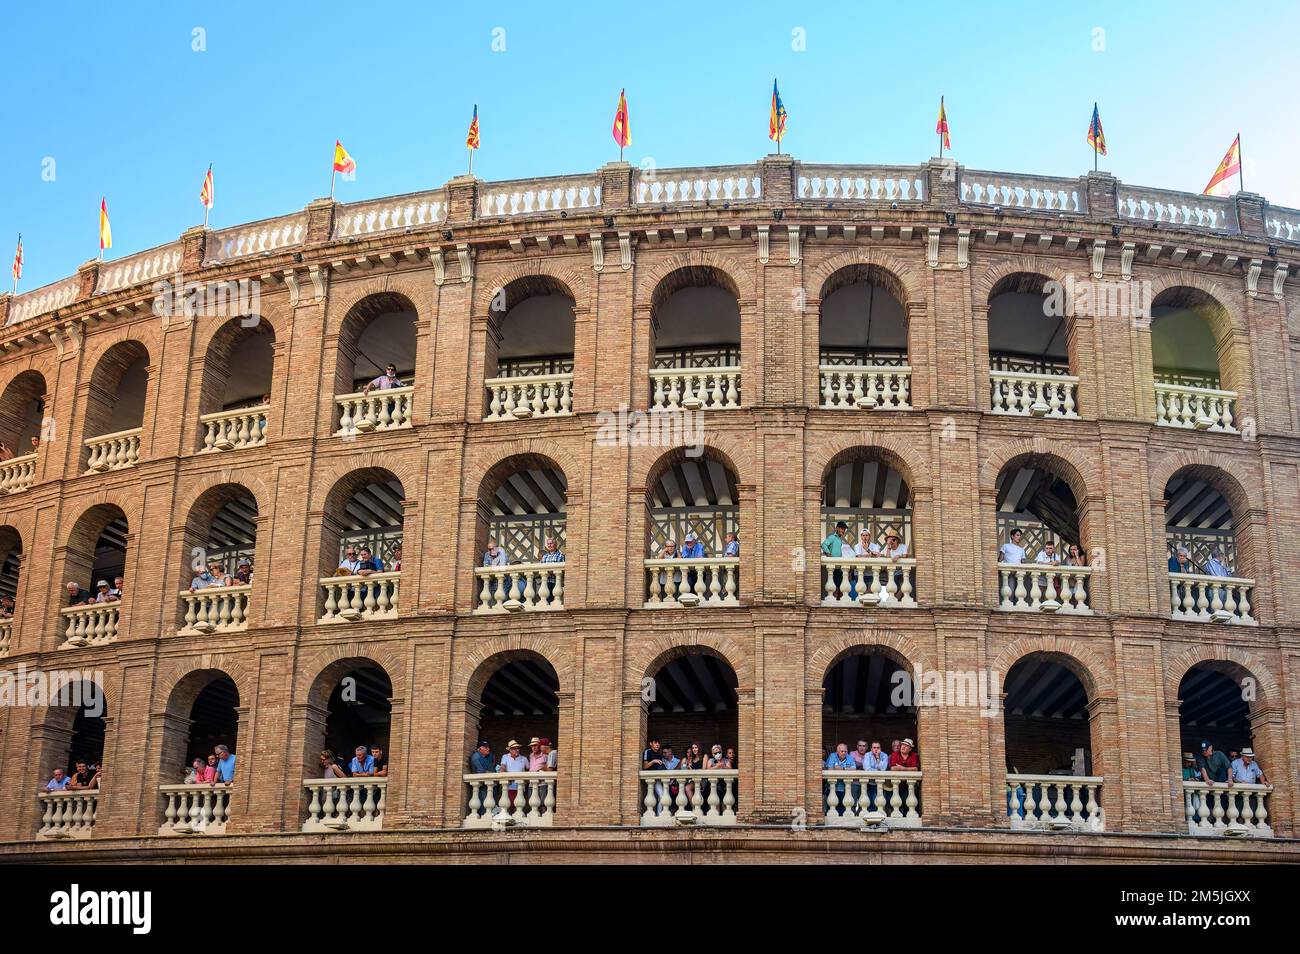 People in the balconies of the bullring. They are waiting for the bullfight event to start. Stock Photo